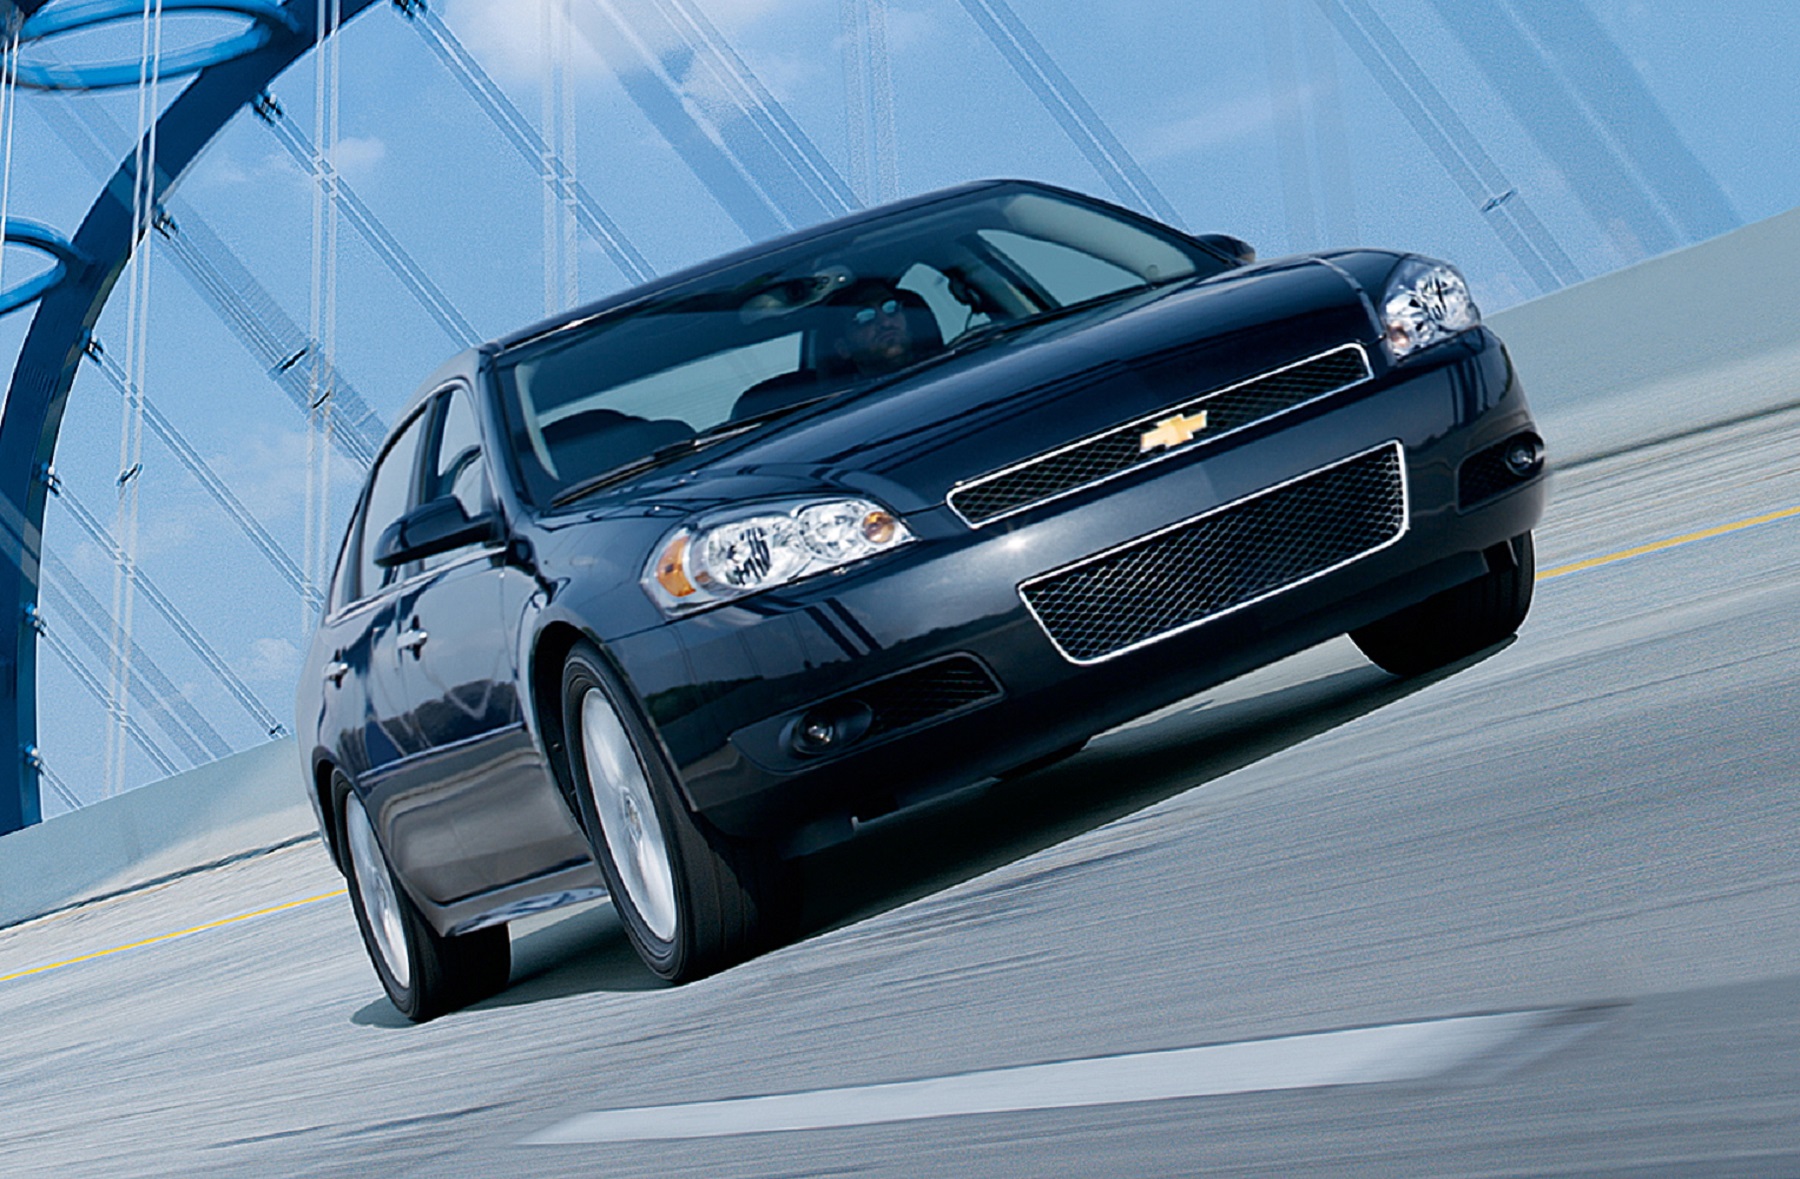 The 2012 Chevrolet Impala, like this one, is among the best cars for the money from 10 years ago.